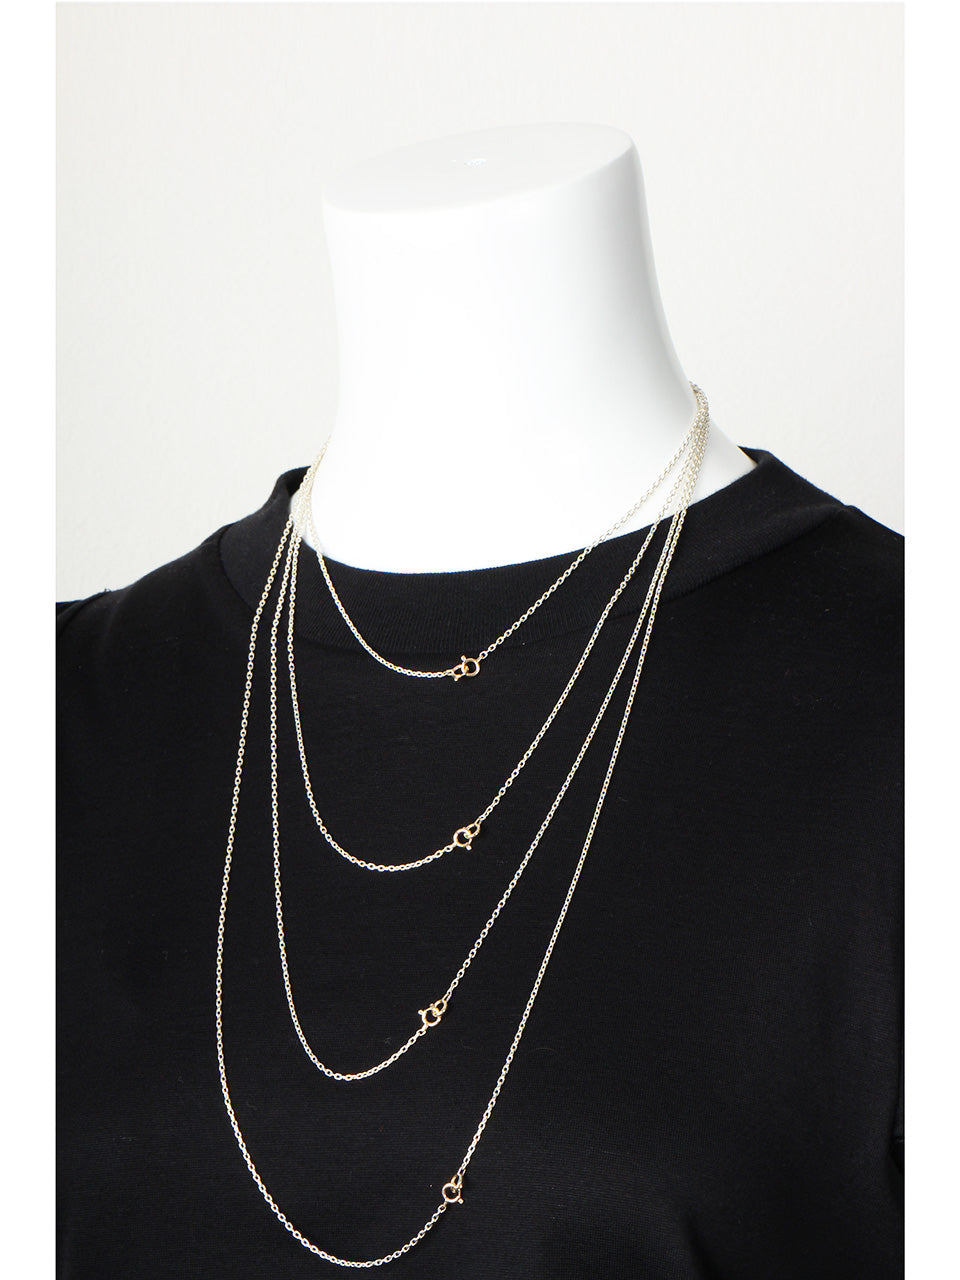 Oval Chain Necklace 50cm